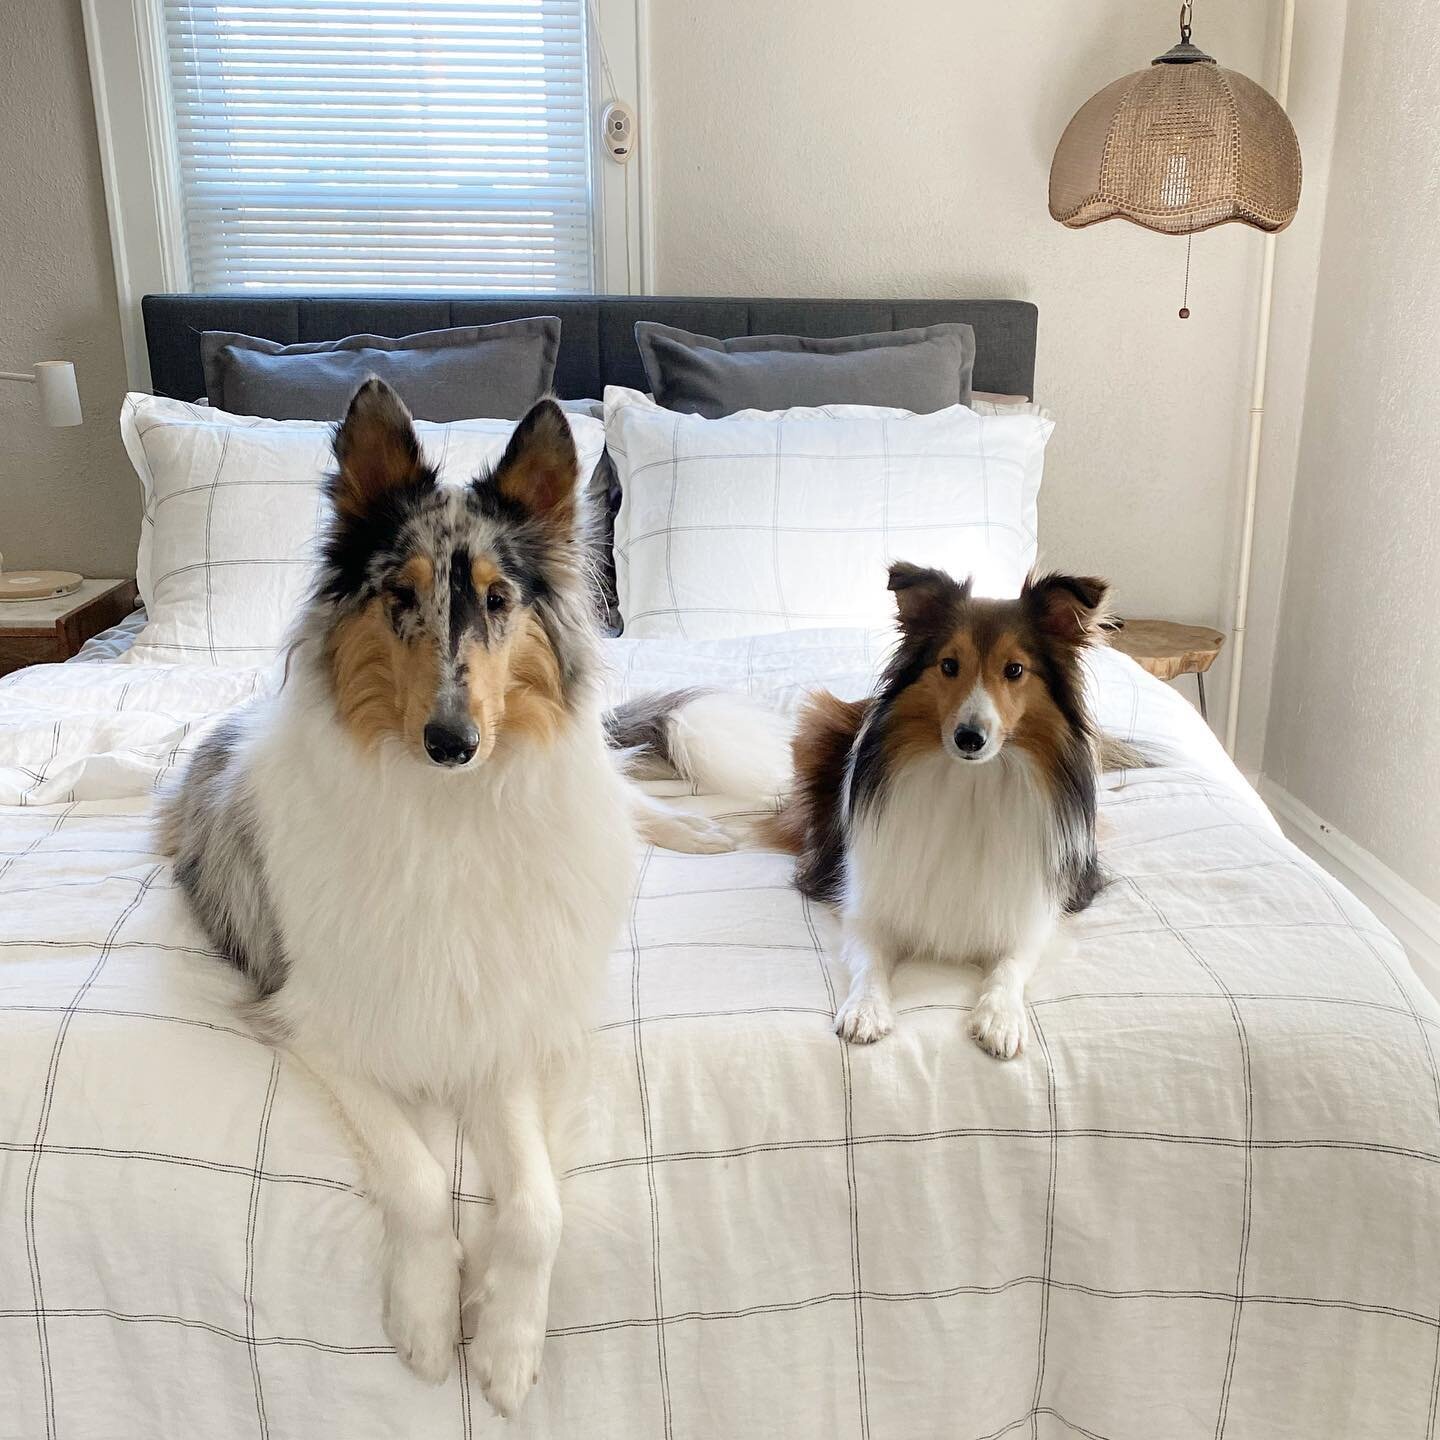 Happy International Dog Day! 🐕🐩🦮🐕&zwj;🦺

These are my babies! 
Honey(rough collie) is my big girl who is actually the baby of the fam and Luci&aacute;(sheltie collie) is the little/big sister. They are definitely showstoppers. My husband and I n